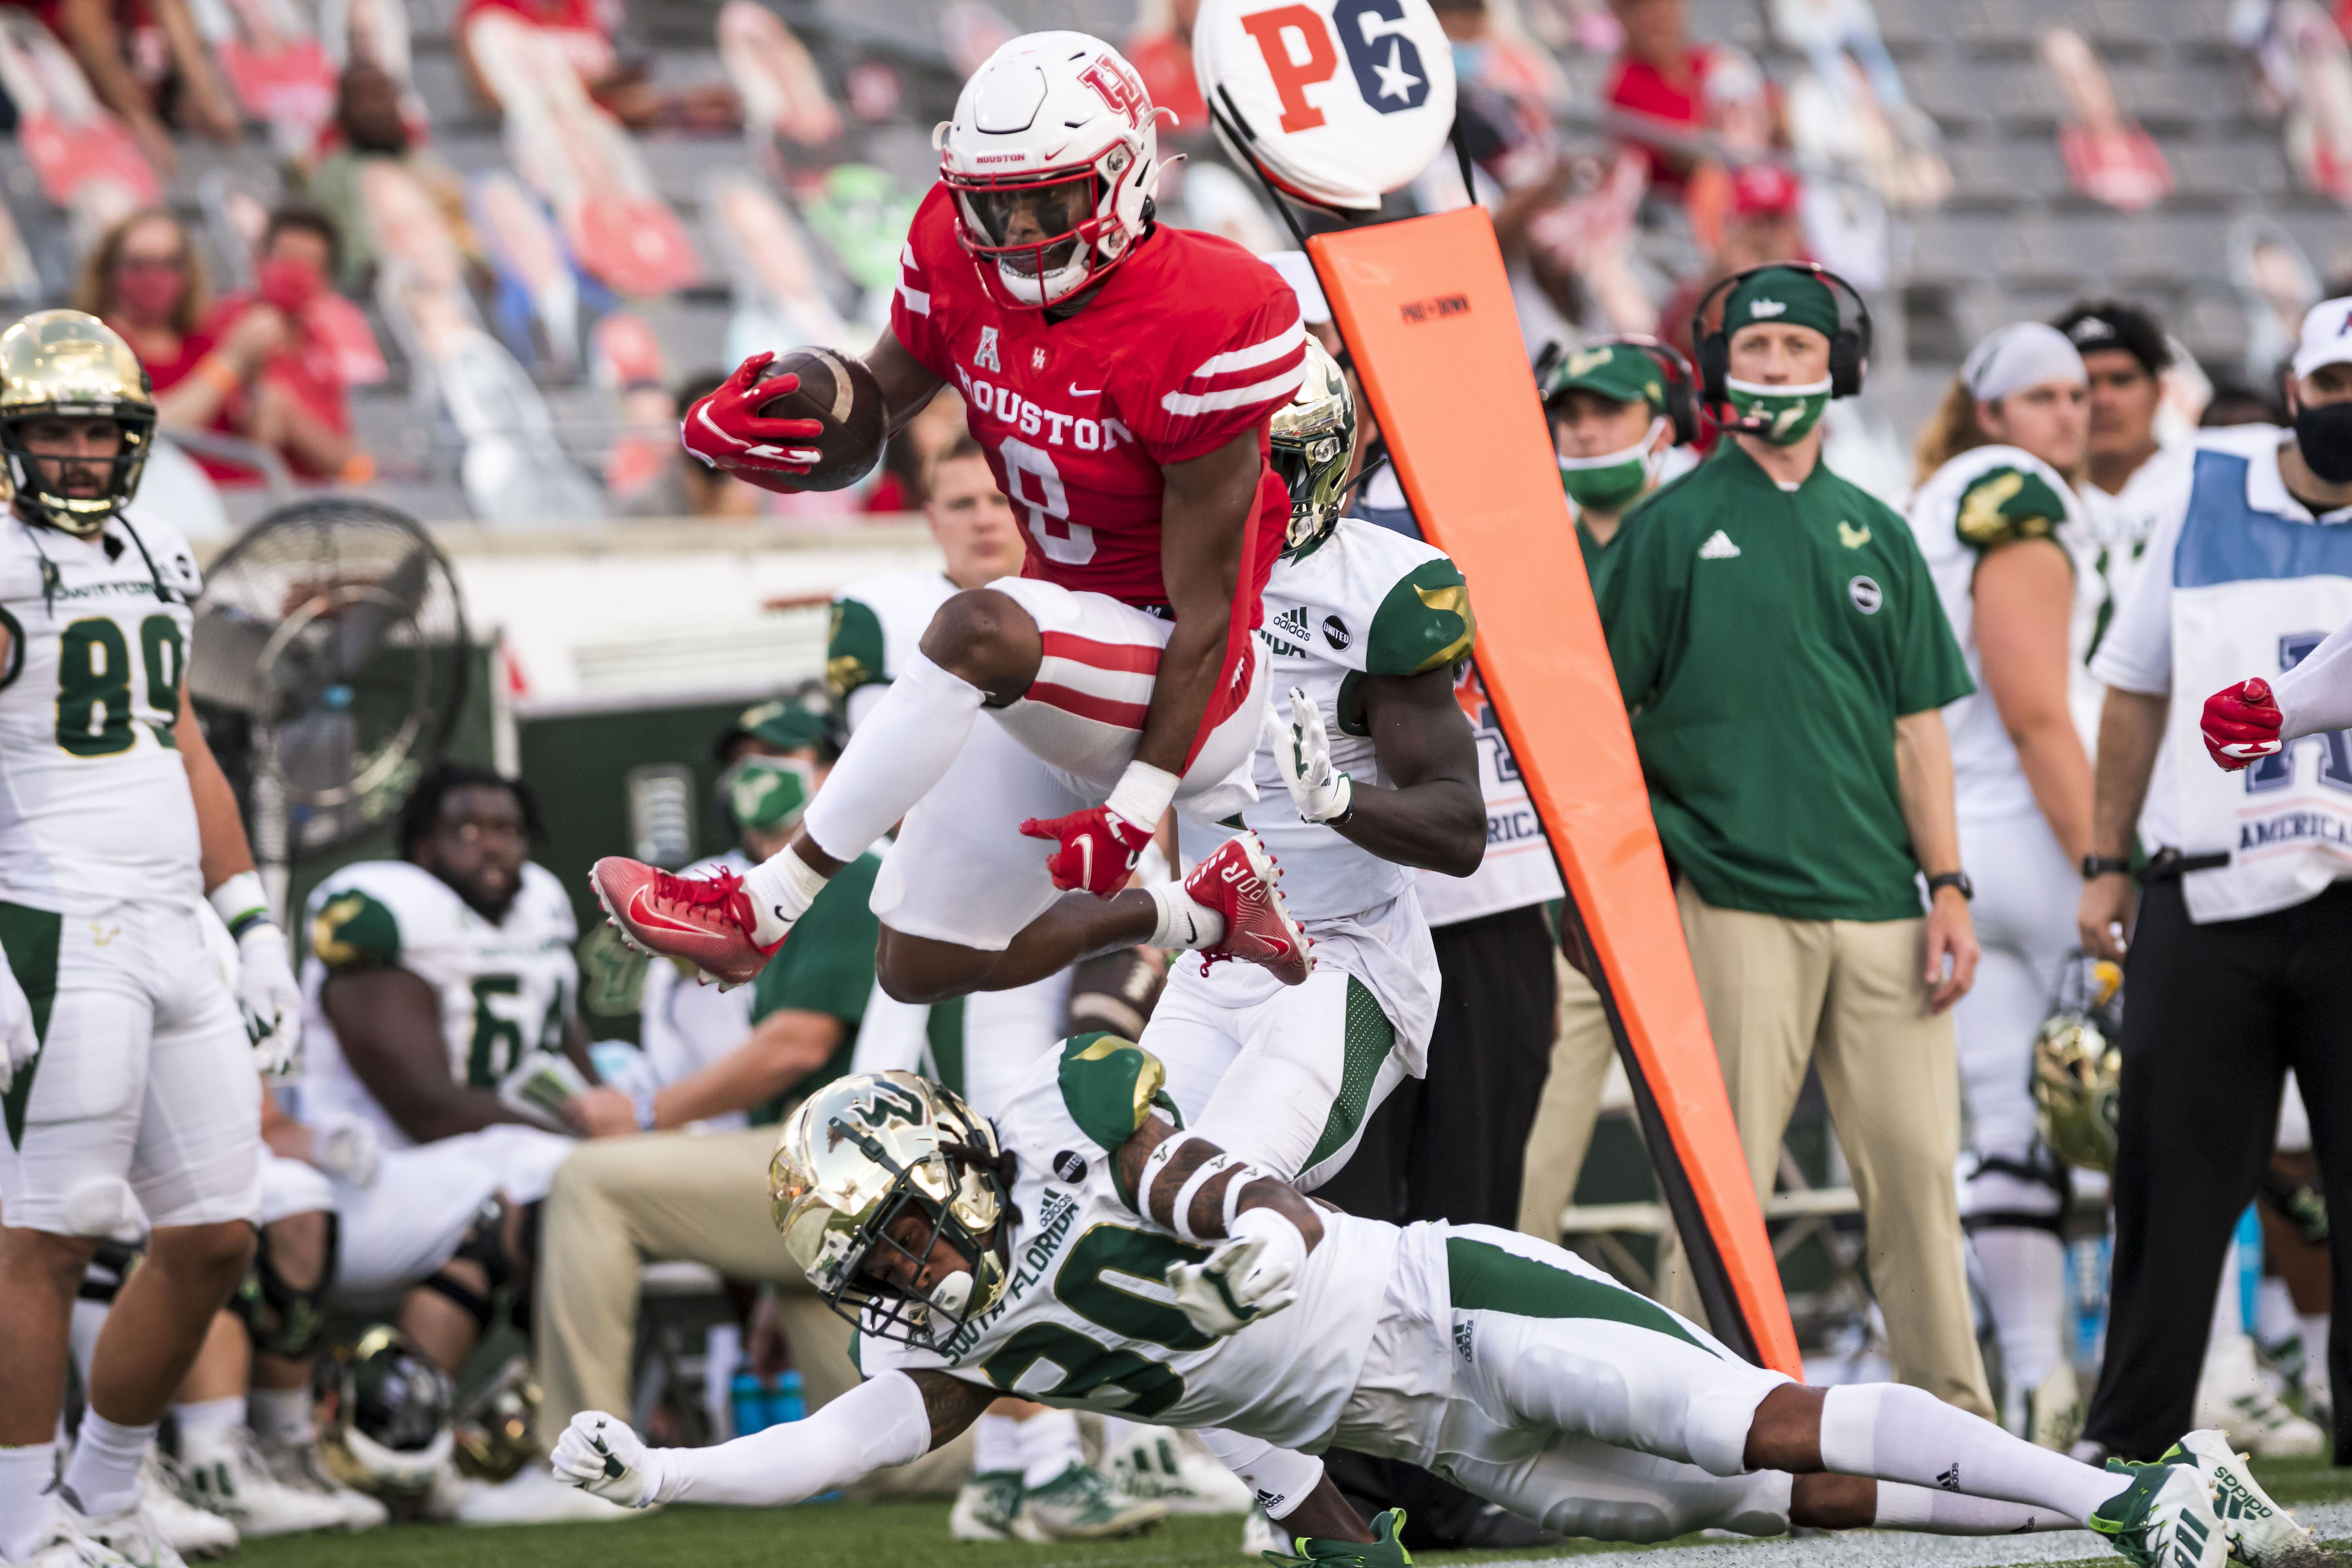 UH football cornerback Marcus Jones hurdles over a USF defender in the Cougars’ 56-21 victory earlier in the season. Head coach Dana Holgorsen has praised Jones throughout the season, calling him the best punt returner in the country. | Courtesy of UH athletics